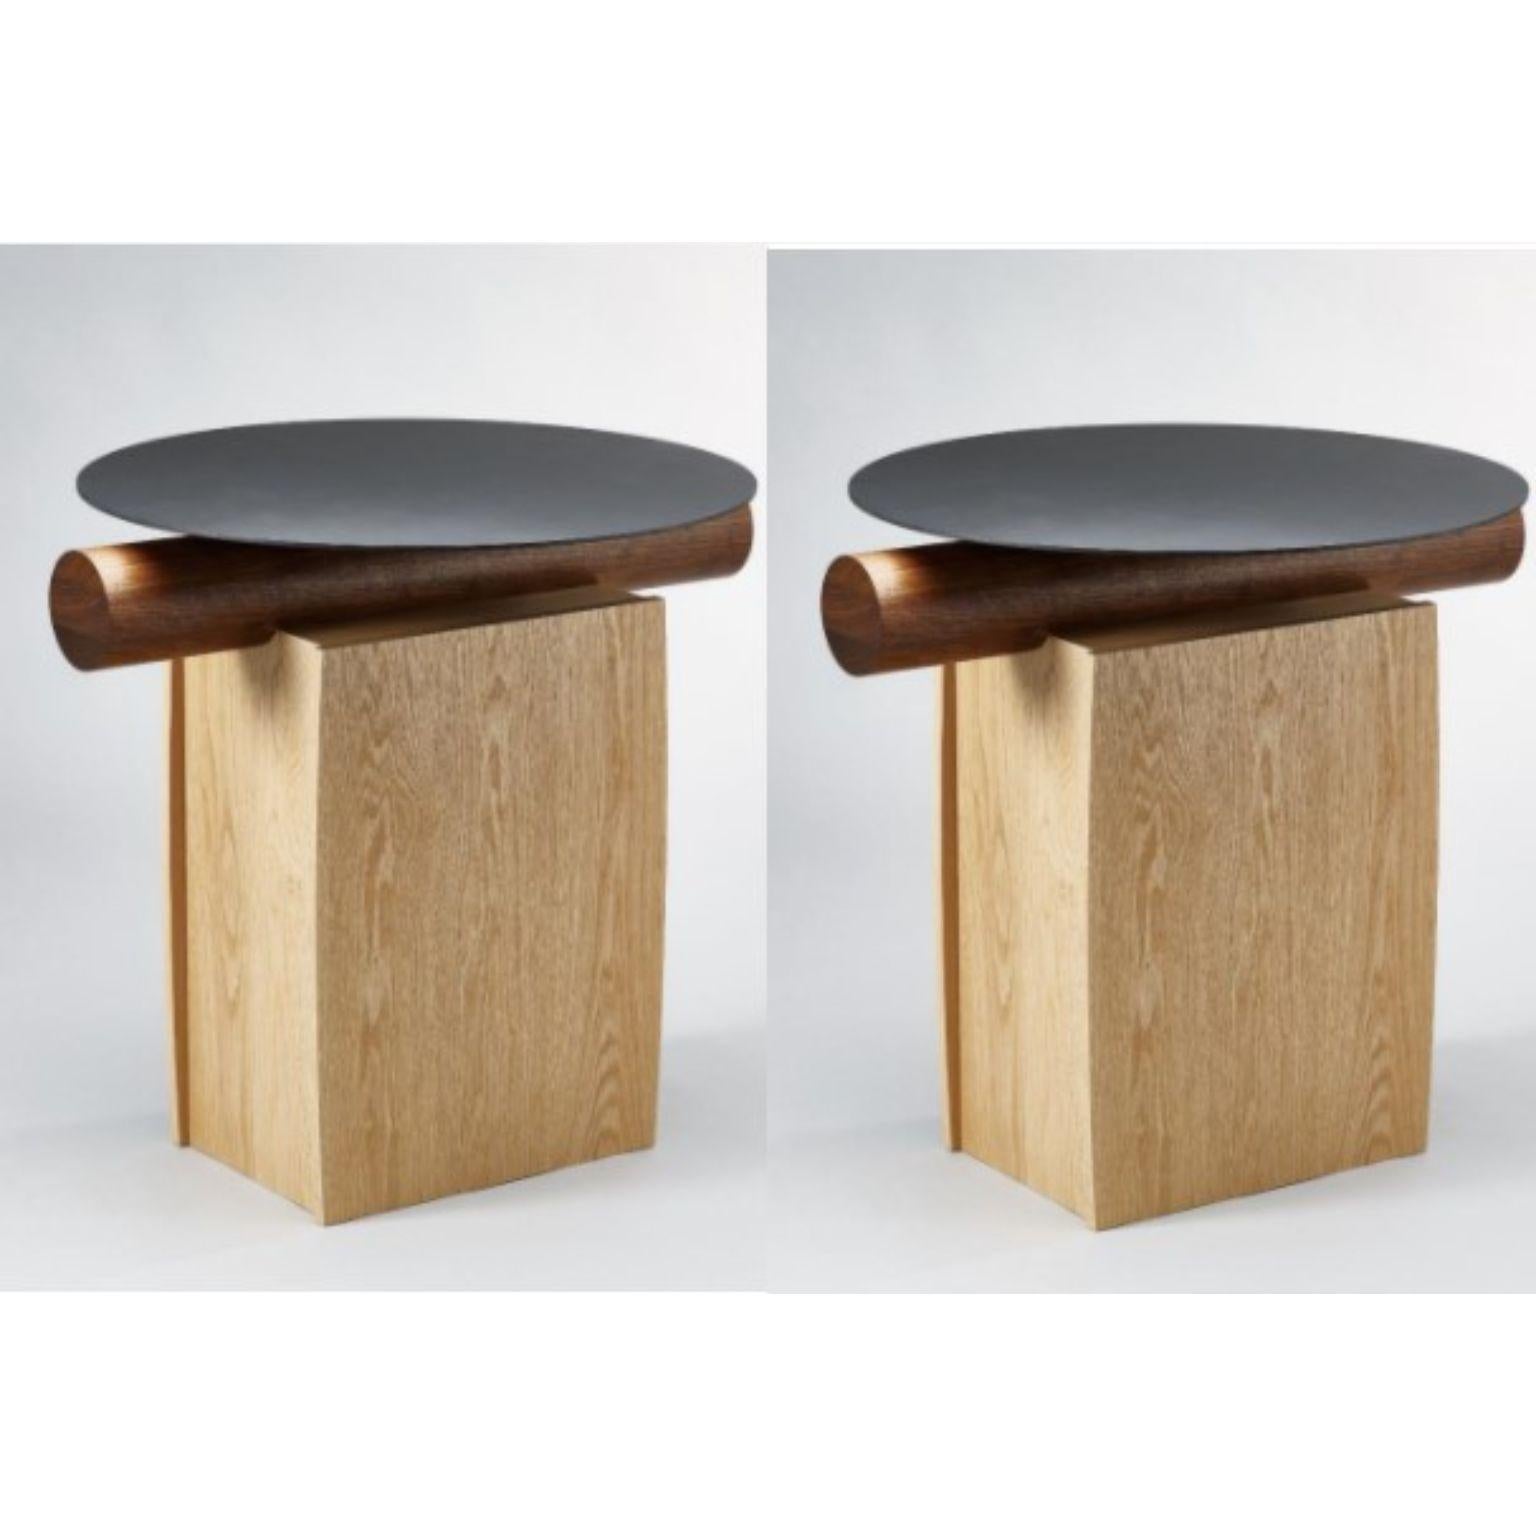 Set of 2 heritage round tables by Lee Jung Hoon
Dimensions: D80 x W70 x H472.4 cm
Materials:red oak, walnut, stainless steel, corrosion

The Heritage series, created by designer Lee Jung-hoon is a collection of sculptural modern furniture. The